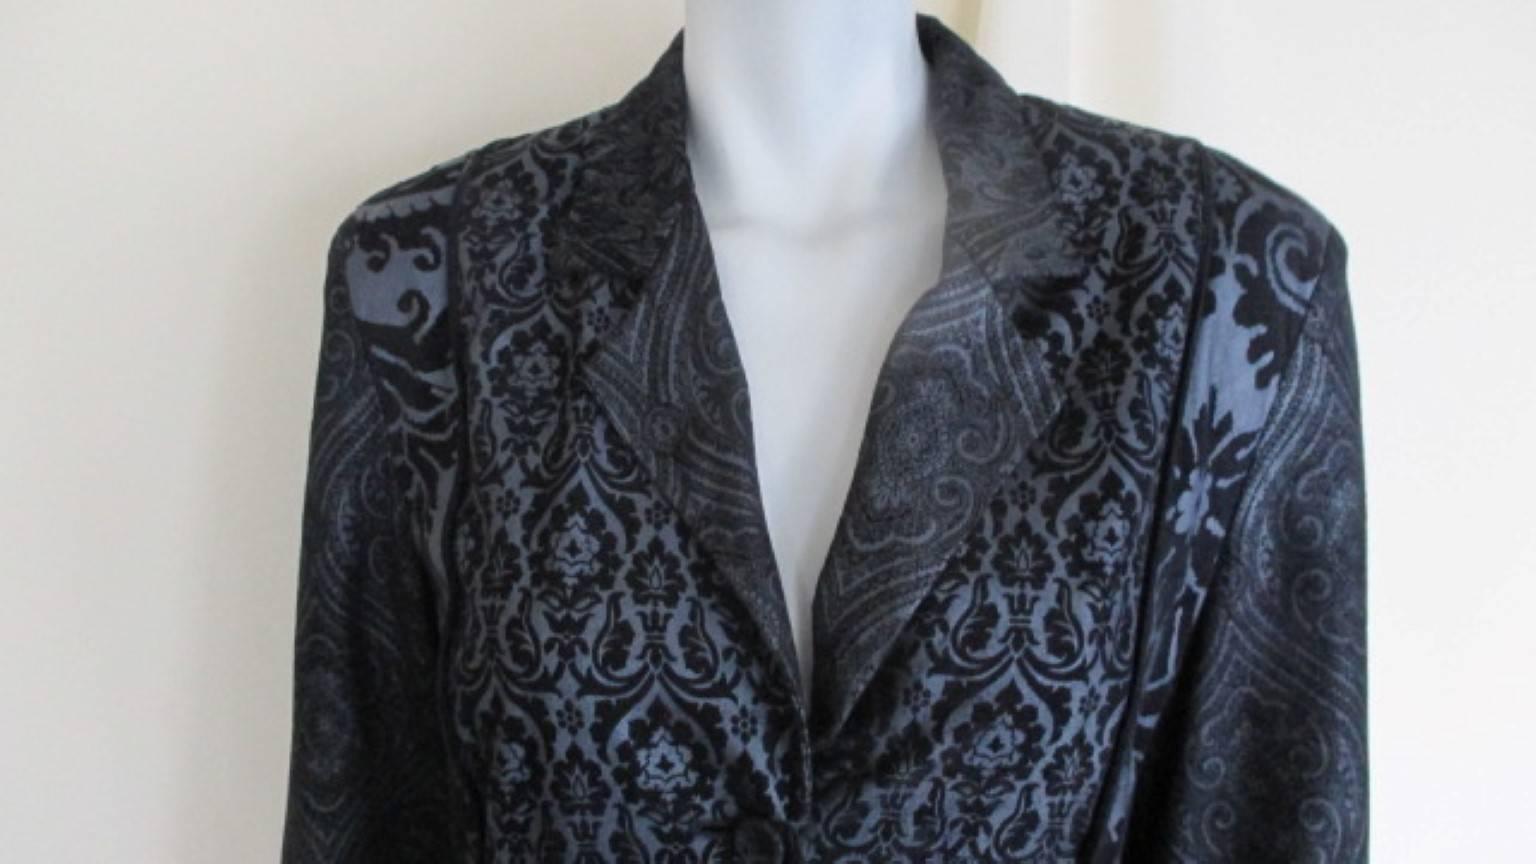 Roberto Cavalli embossed very soft lambskin patchwork jacket.
4 buttons, no pockets.
Its in excellent vintage condition
Size is mentioned large but fits smaller